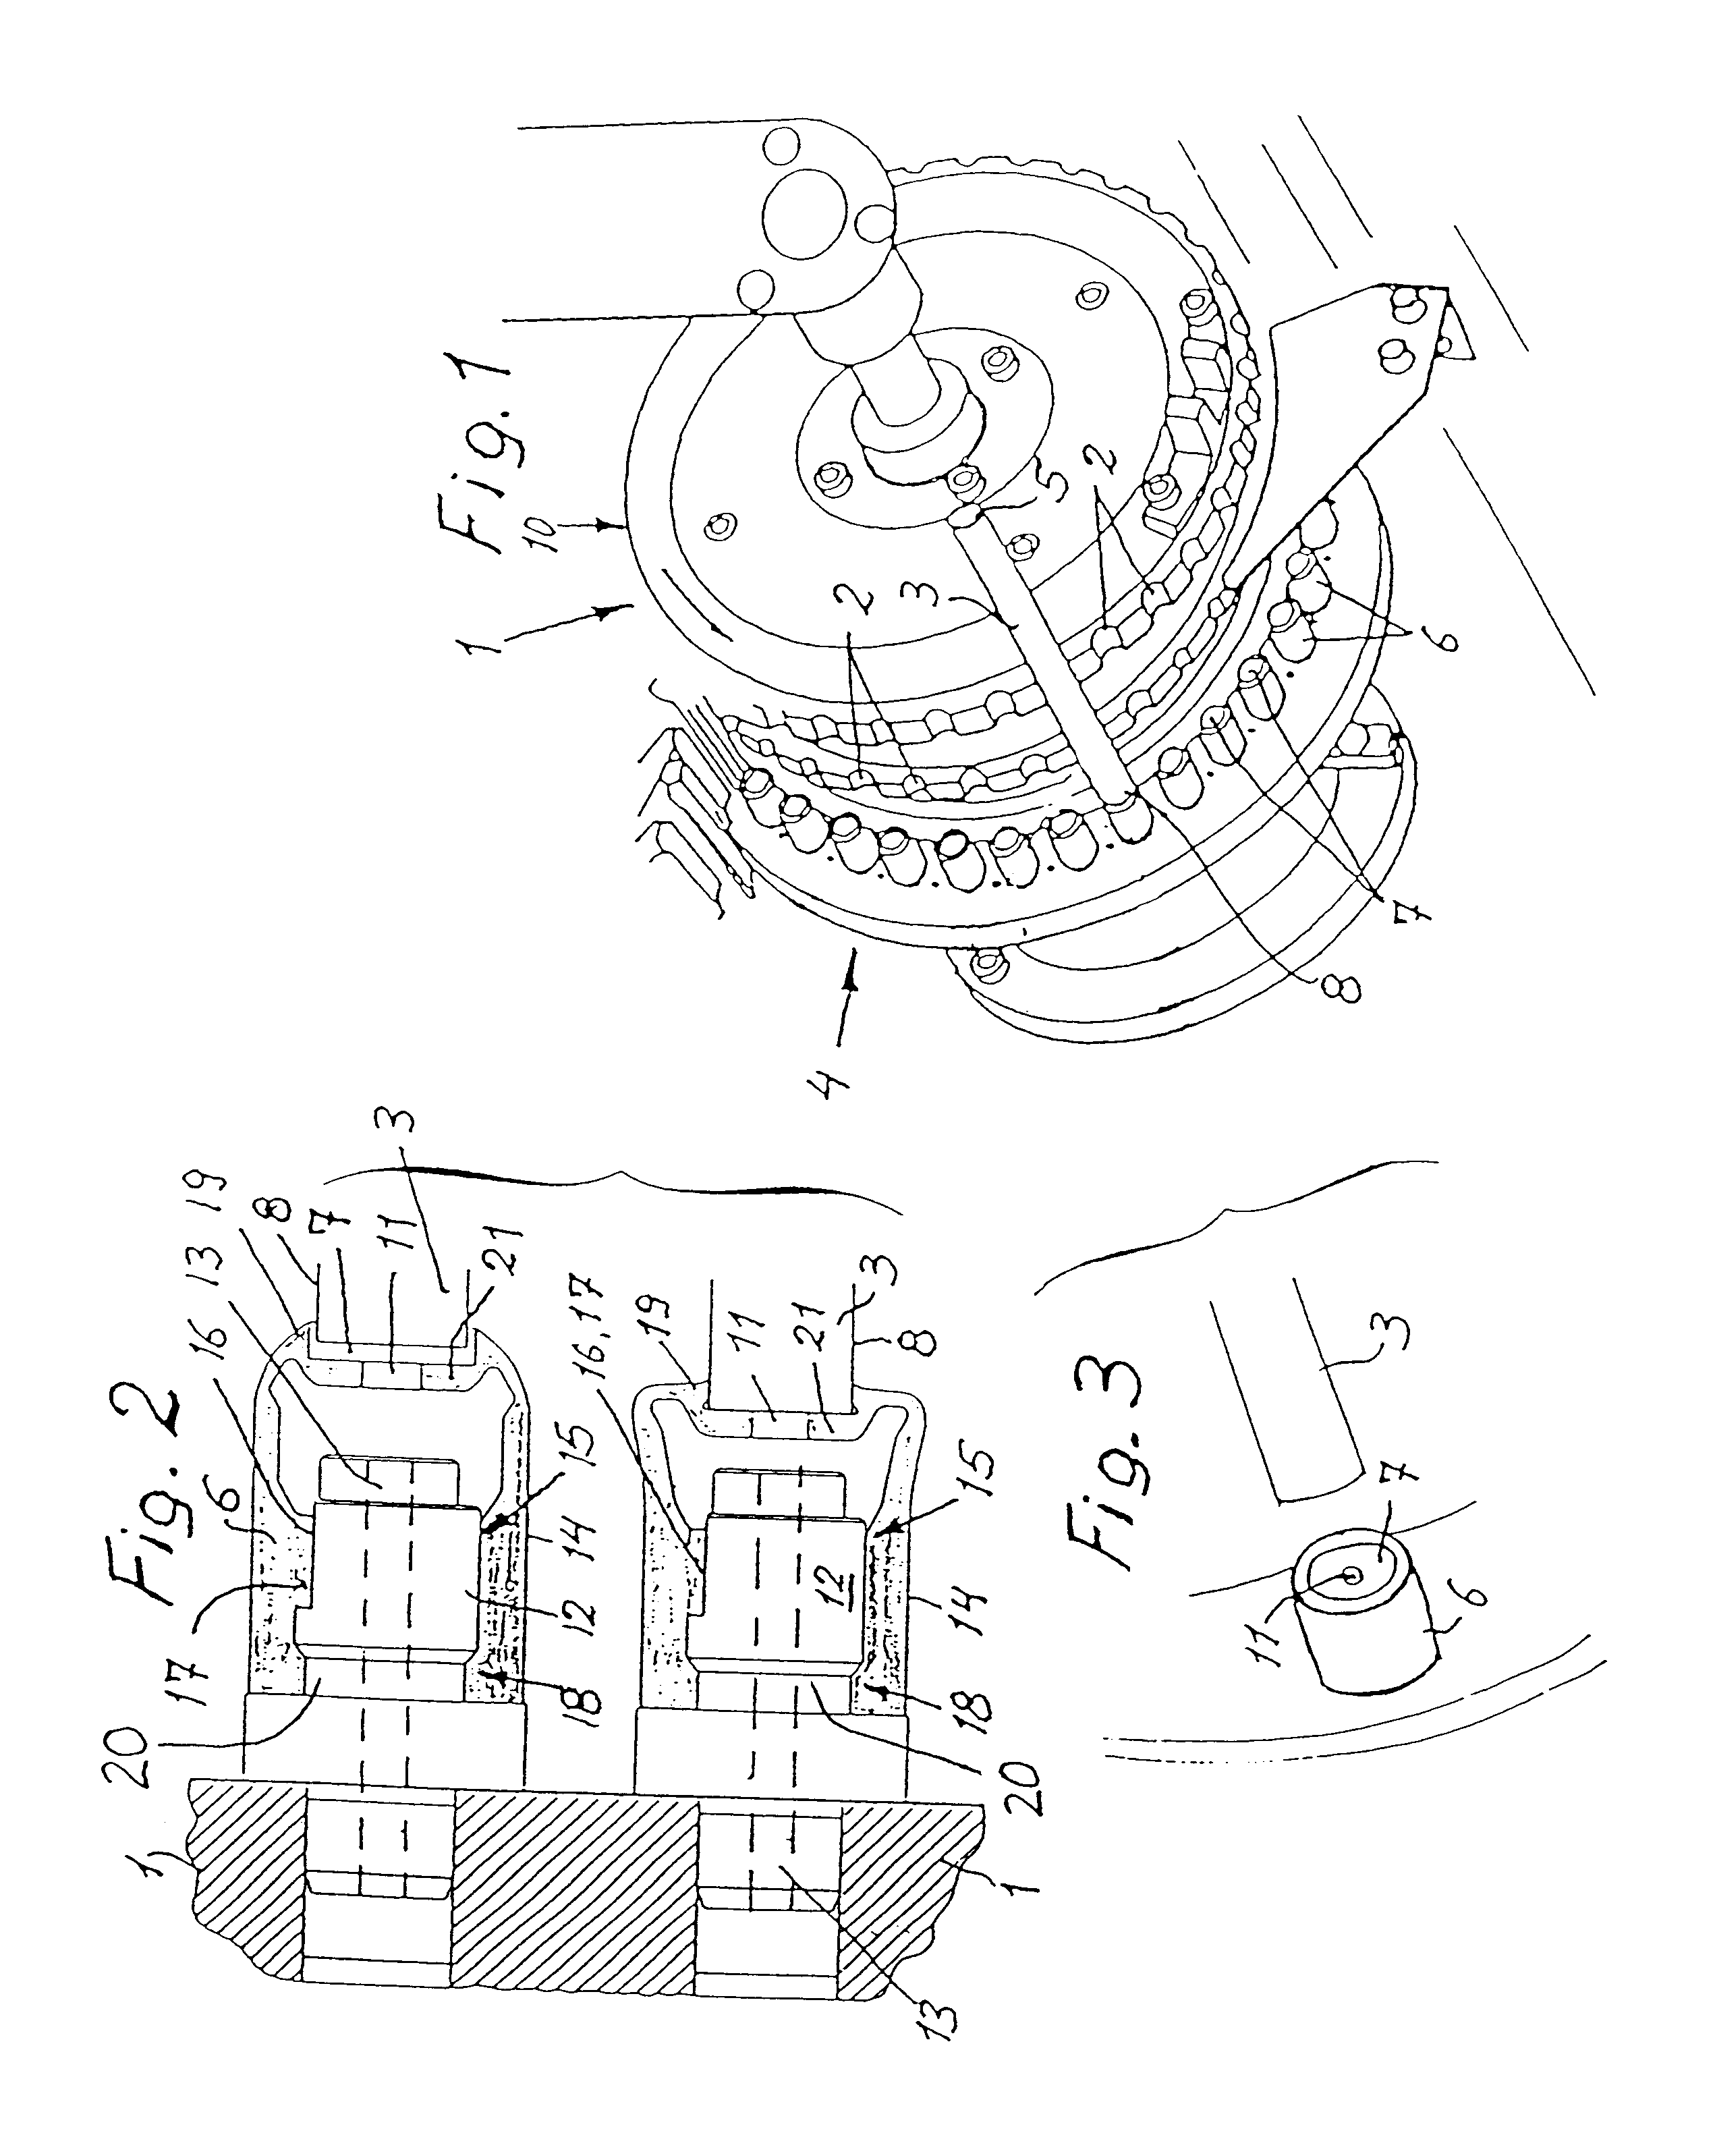 Sealing device for the end portions of rod-shaped smokers' products having non-circular cross-sectional outlines